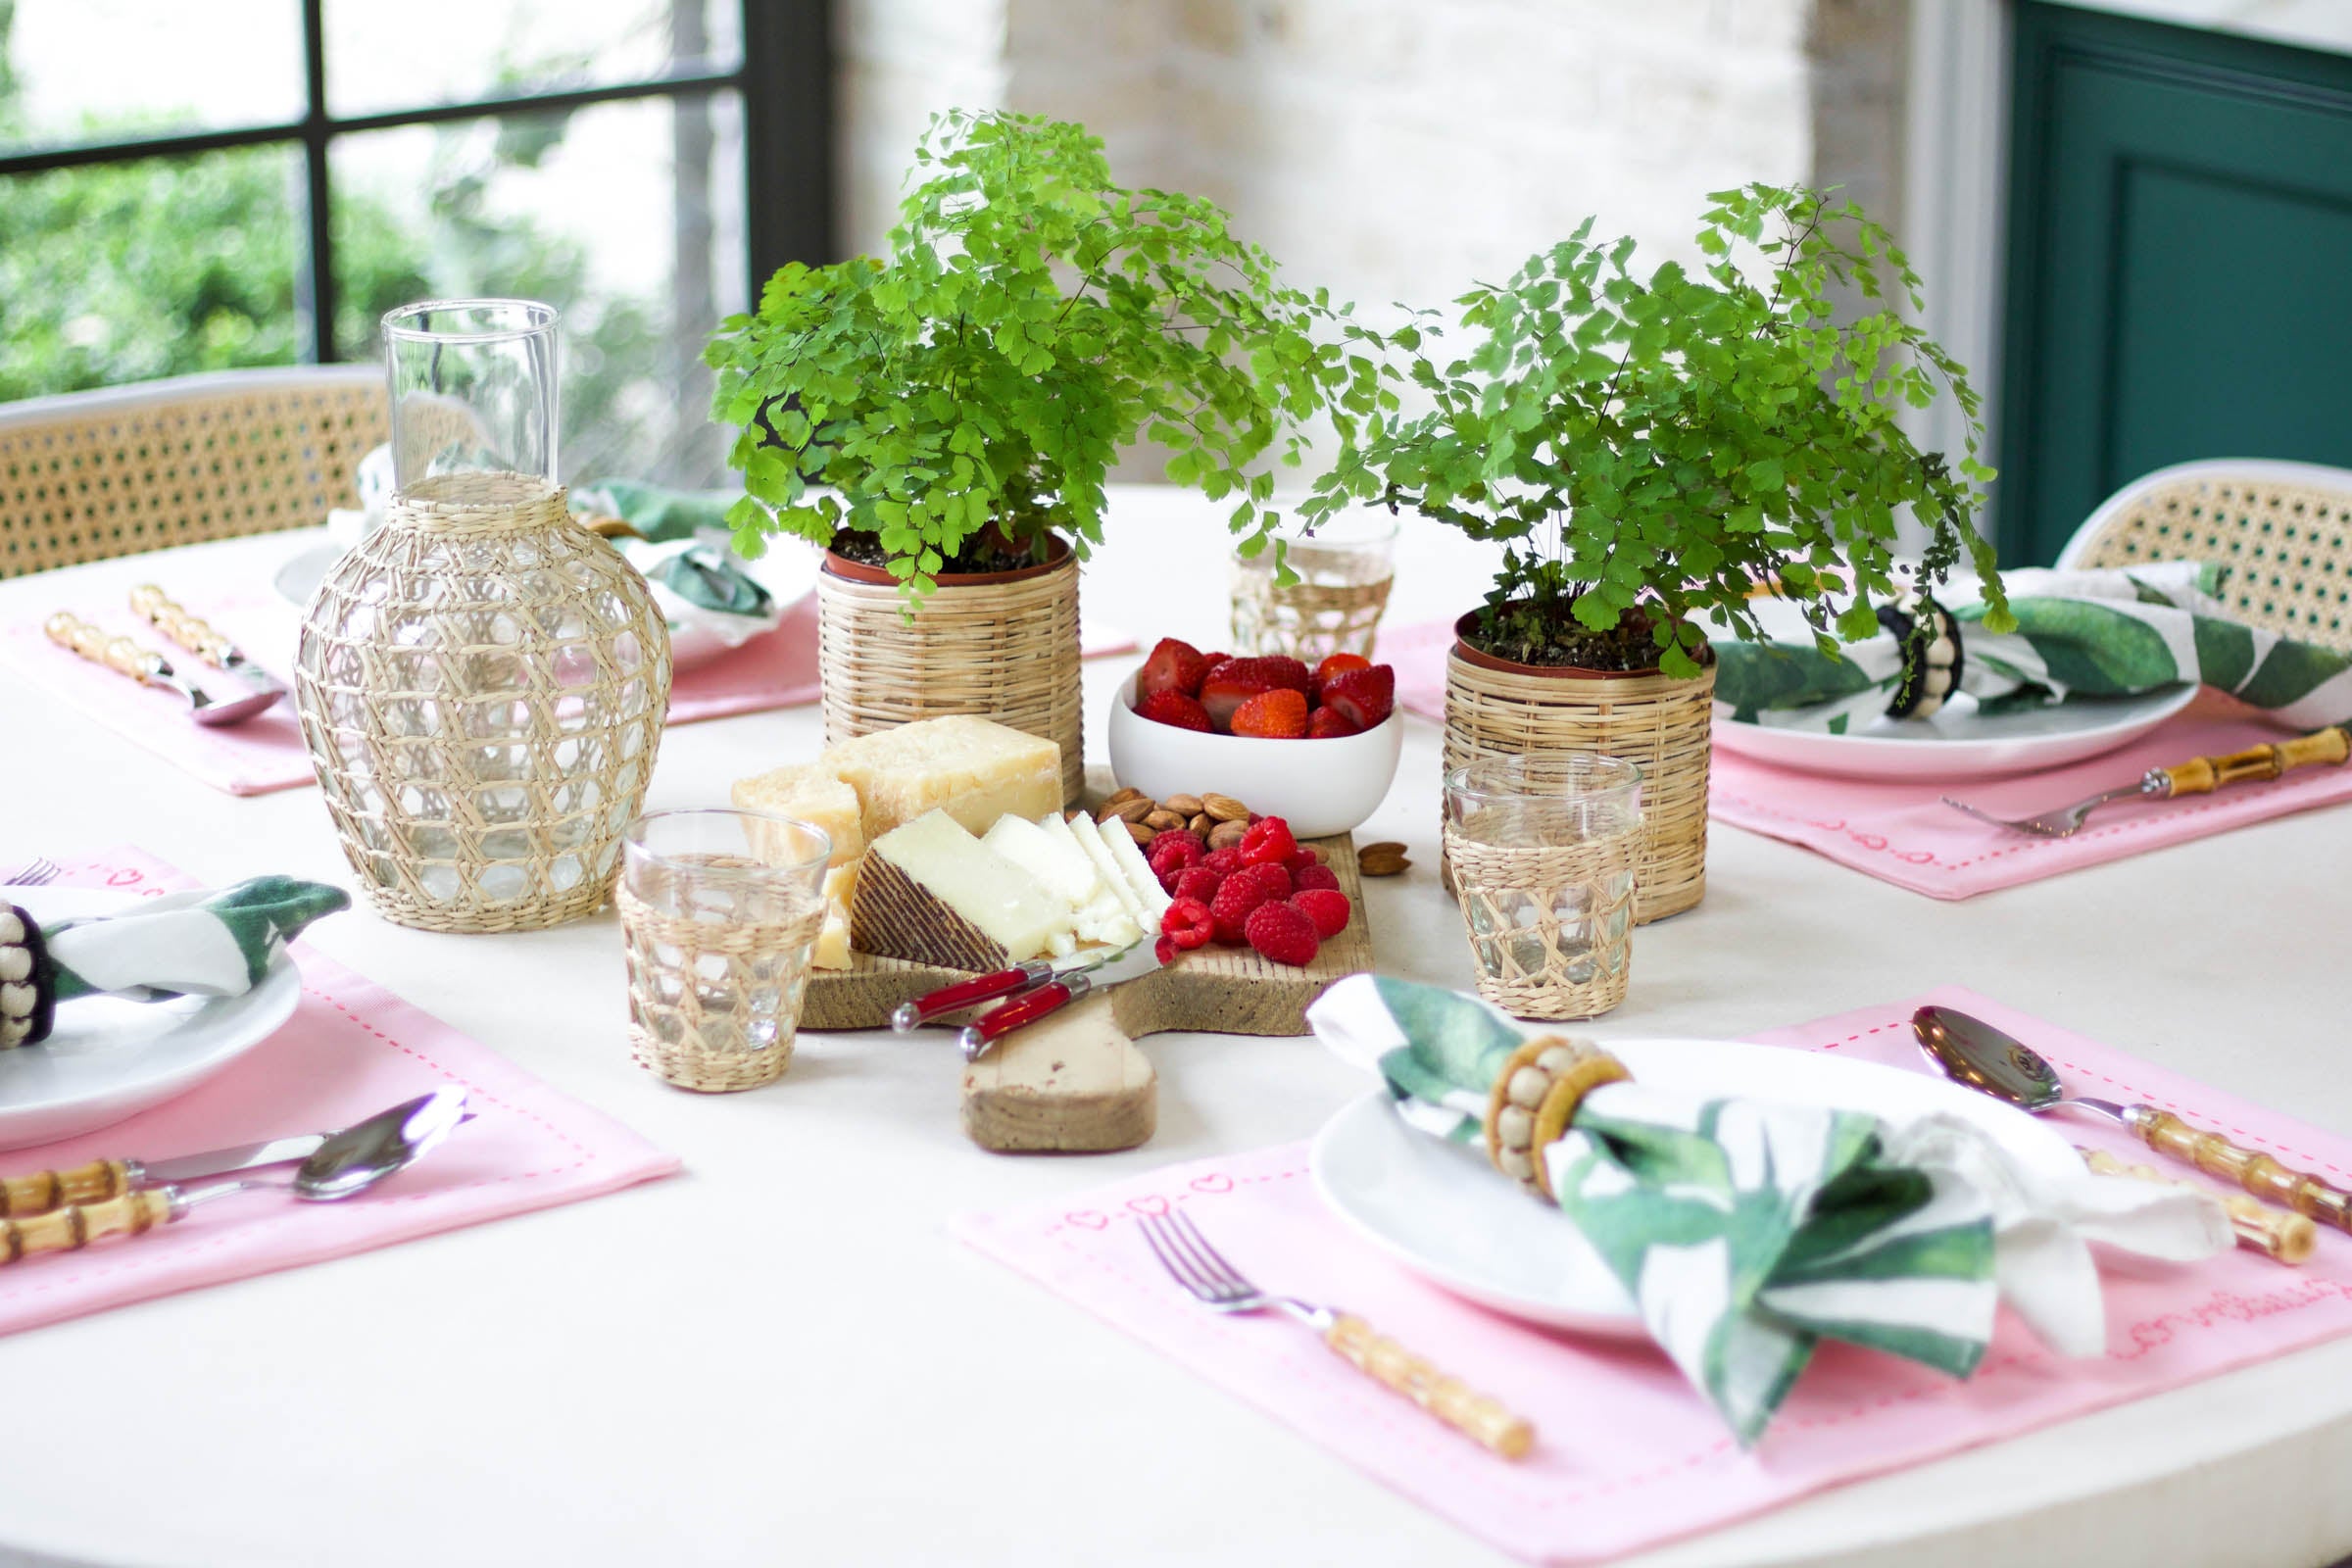 Three Valentine's Settings to Show Your Table Some Love